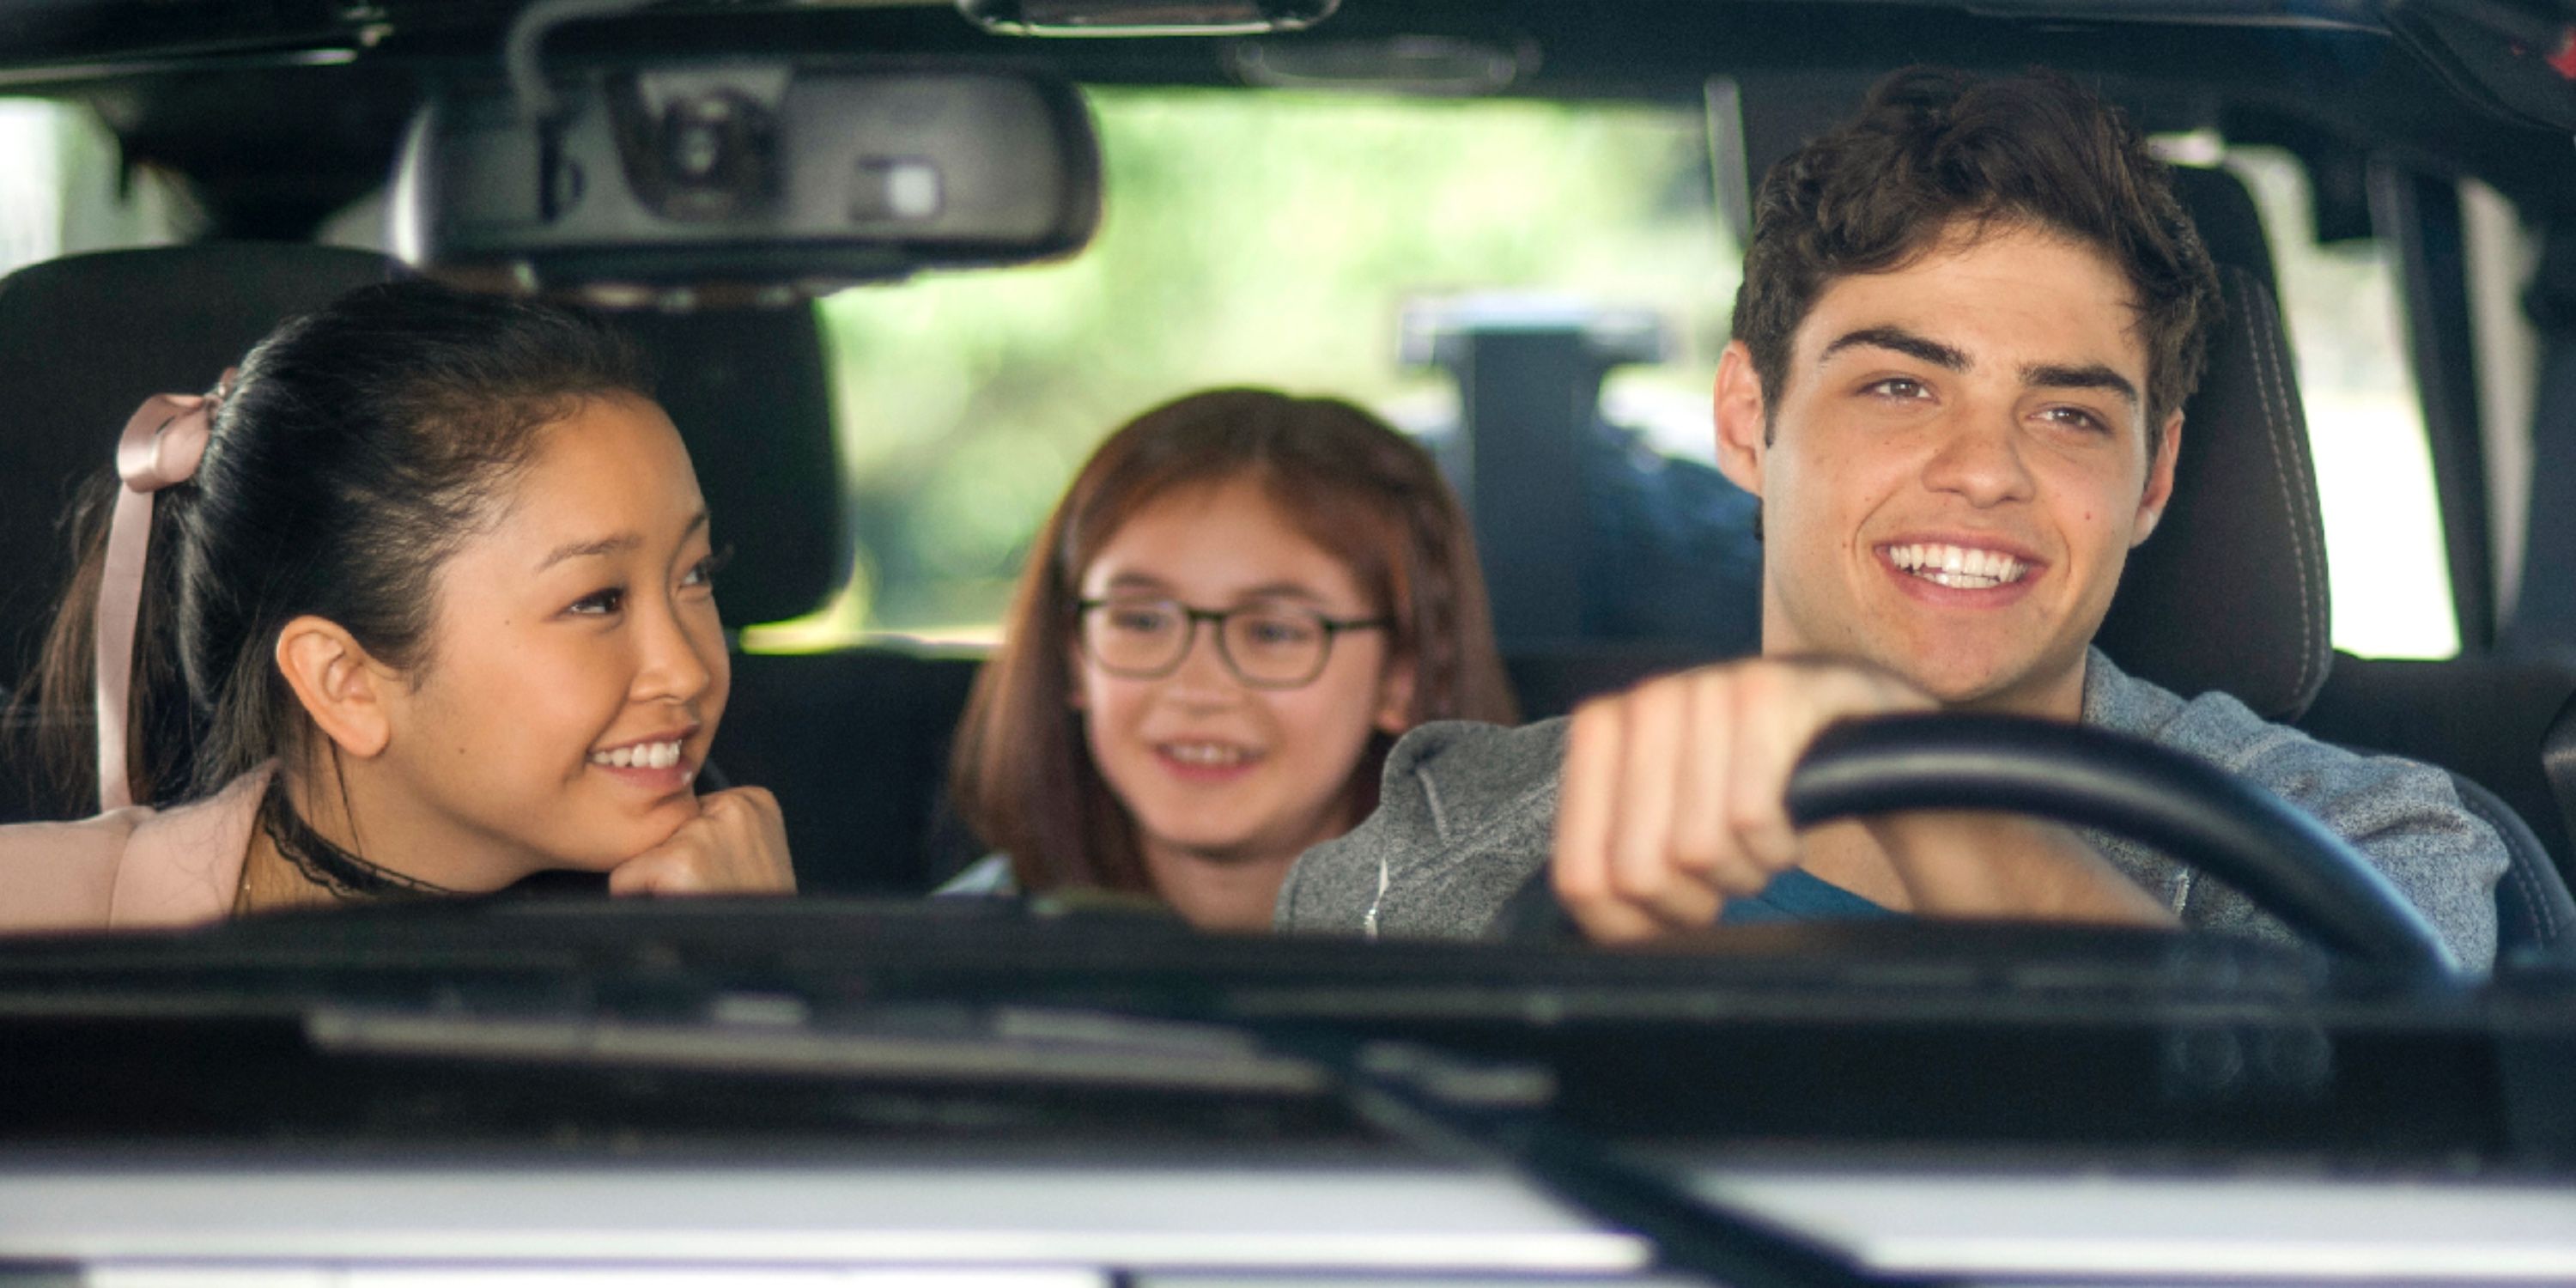 Noah-Centineo as Peter Kavinsky in To All The Boys: I Loved Before